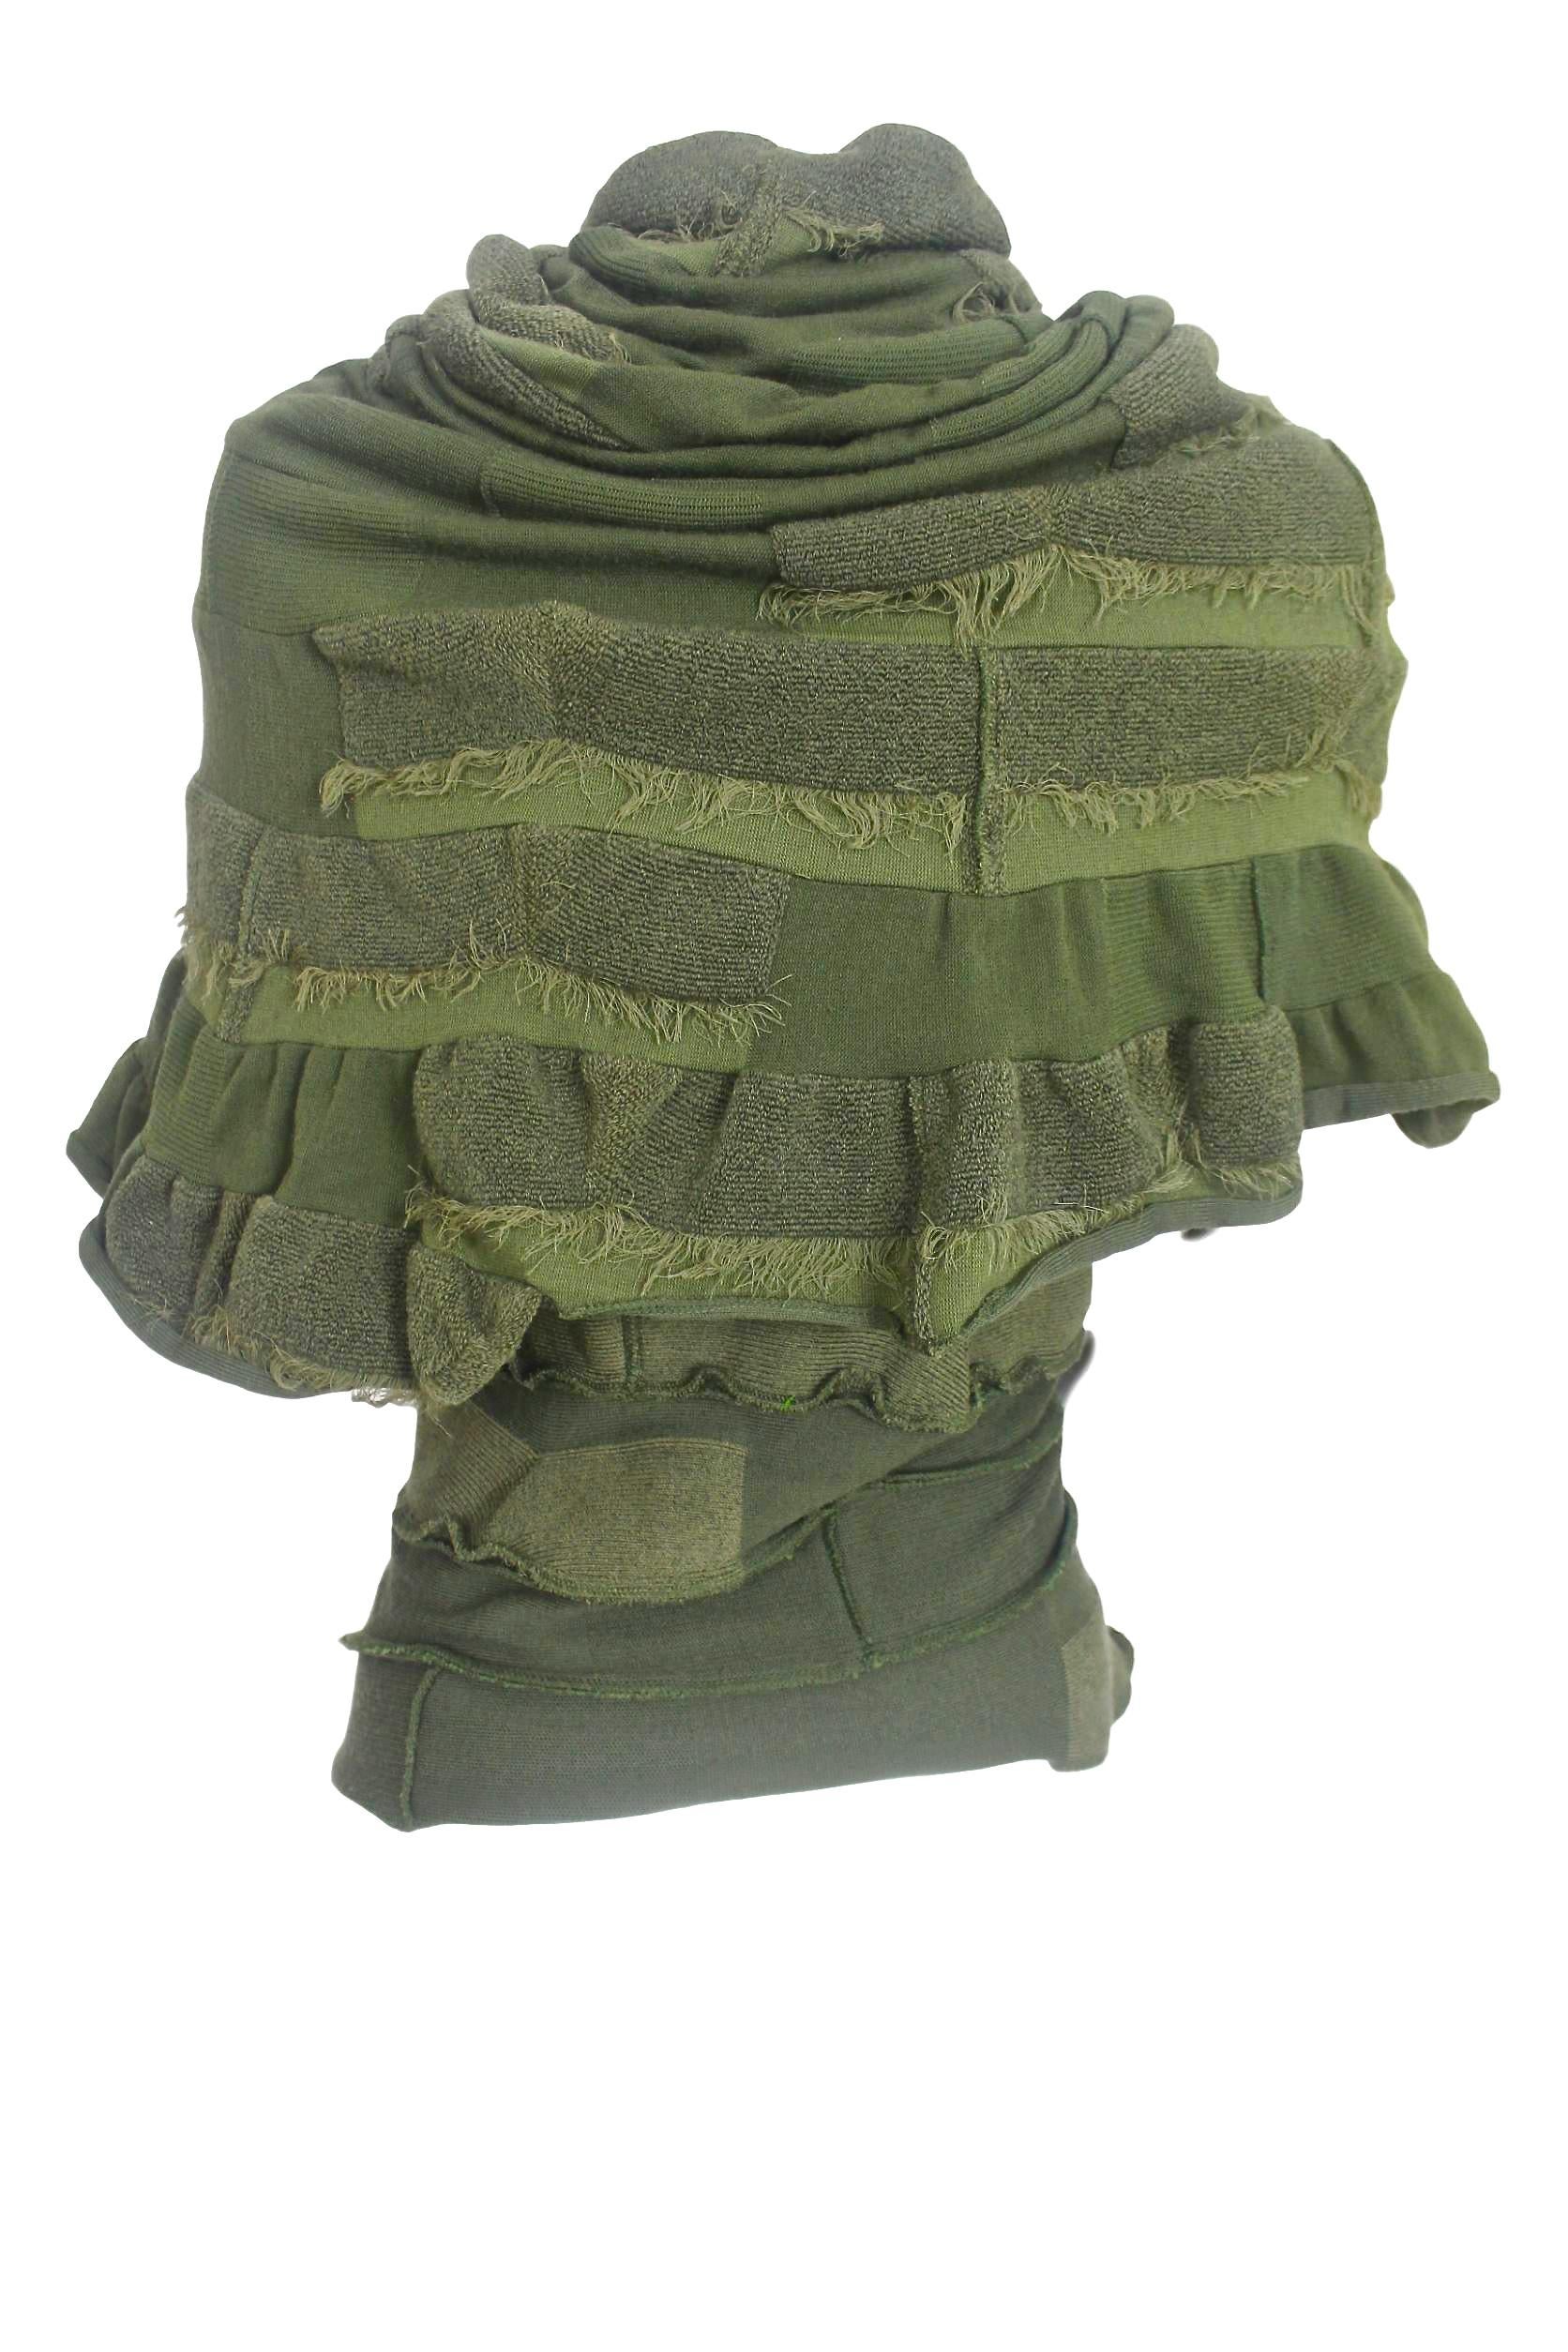 Comme des Garçons Junya Watanabe 2006 Collection Military Knitted Poncho 7